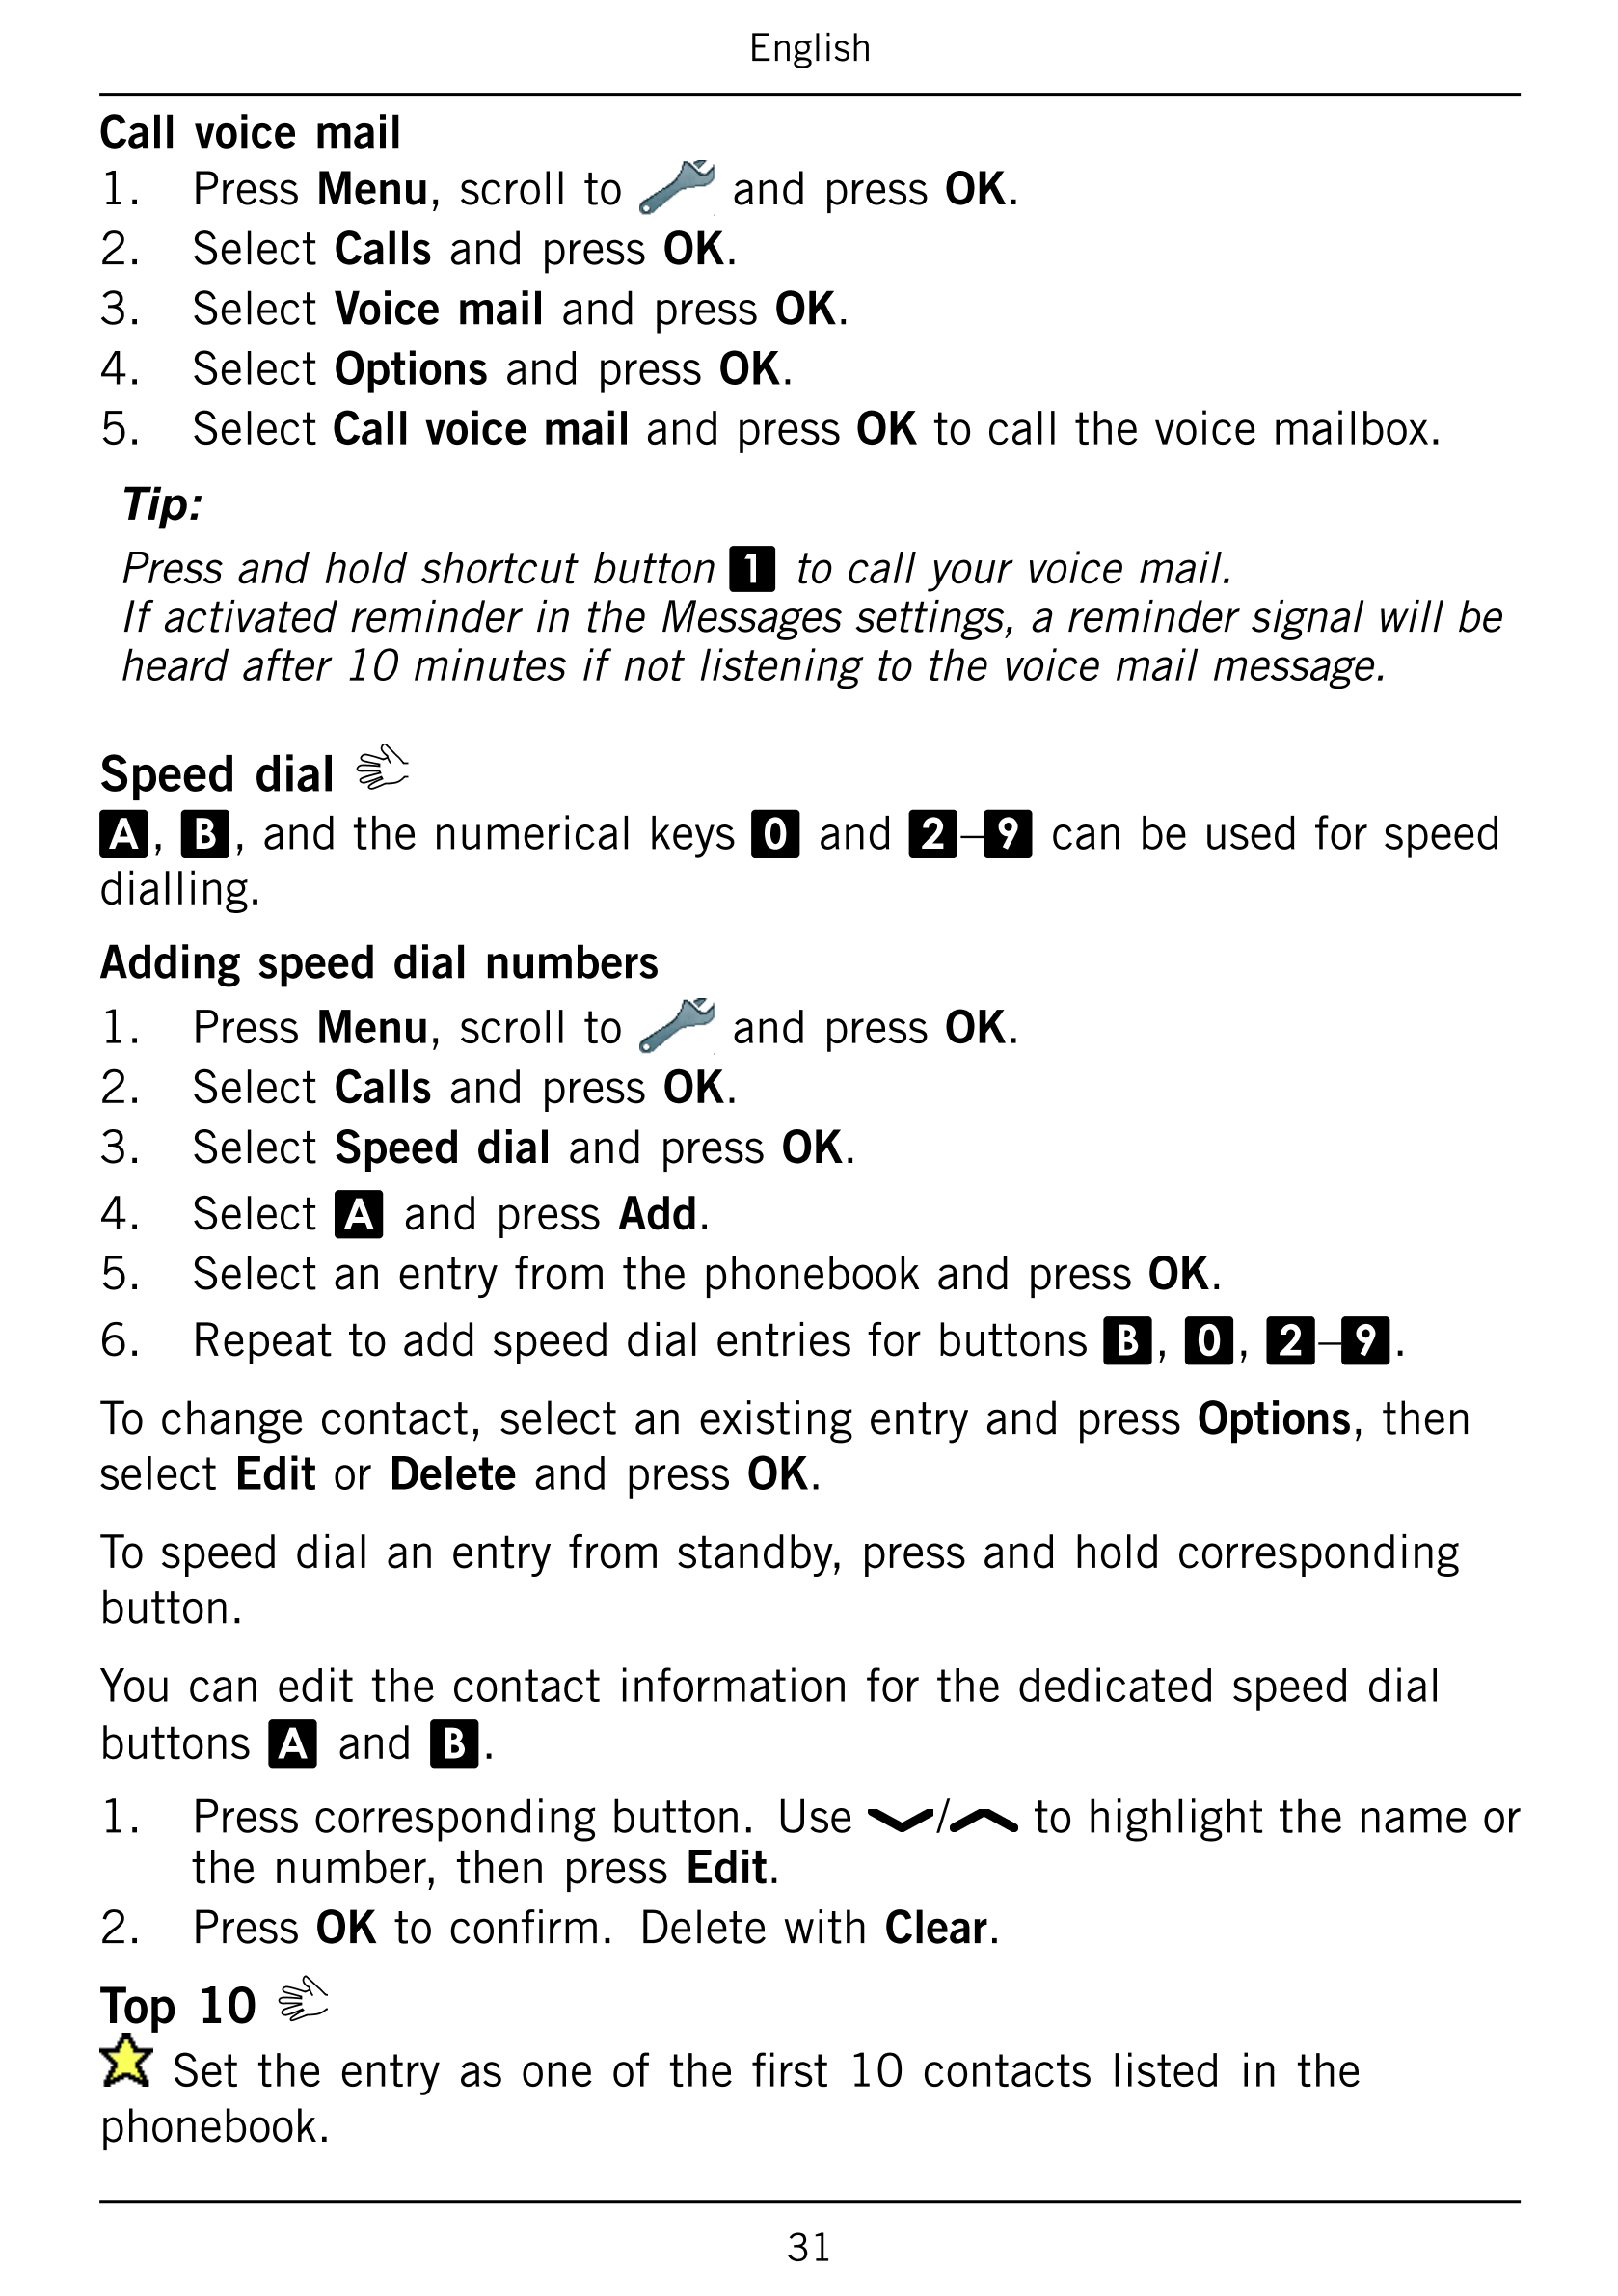 English
Call voice mail
1.     Press Menu, scroll to and press OK.
2.     Select Calls and press OK.
3.     Select Voice mail an